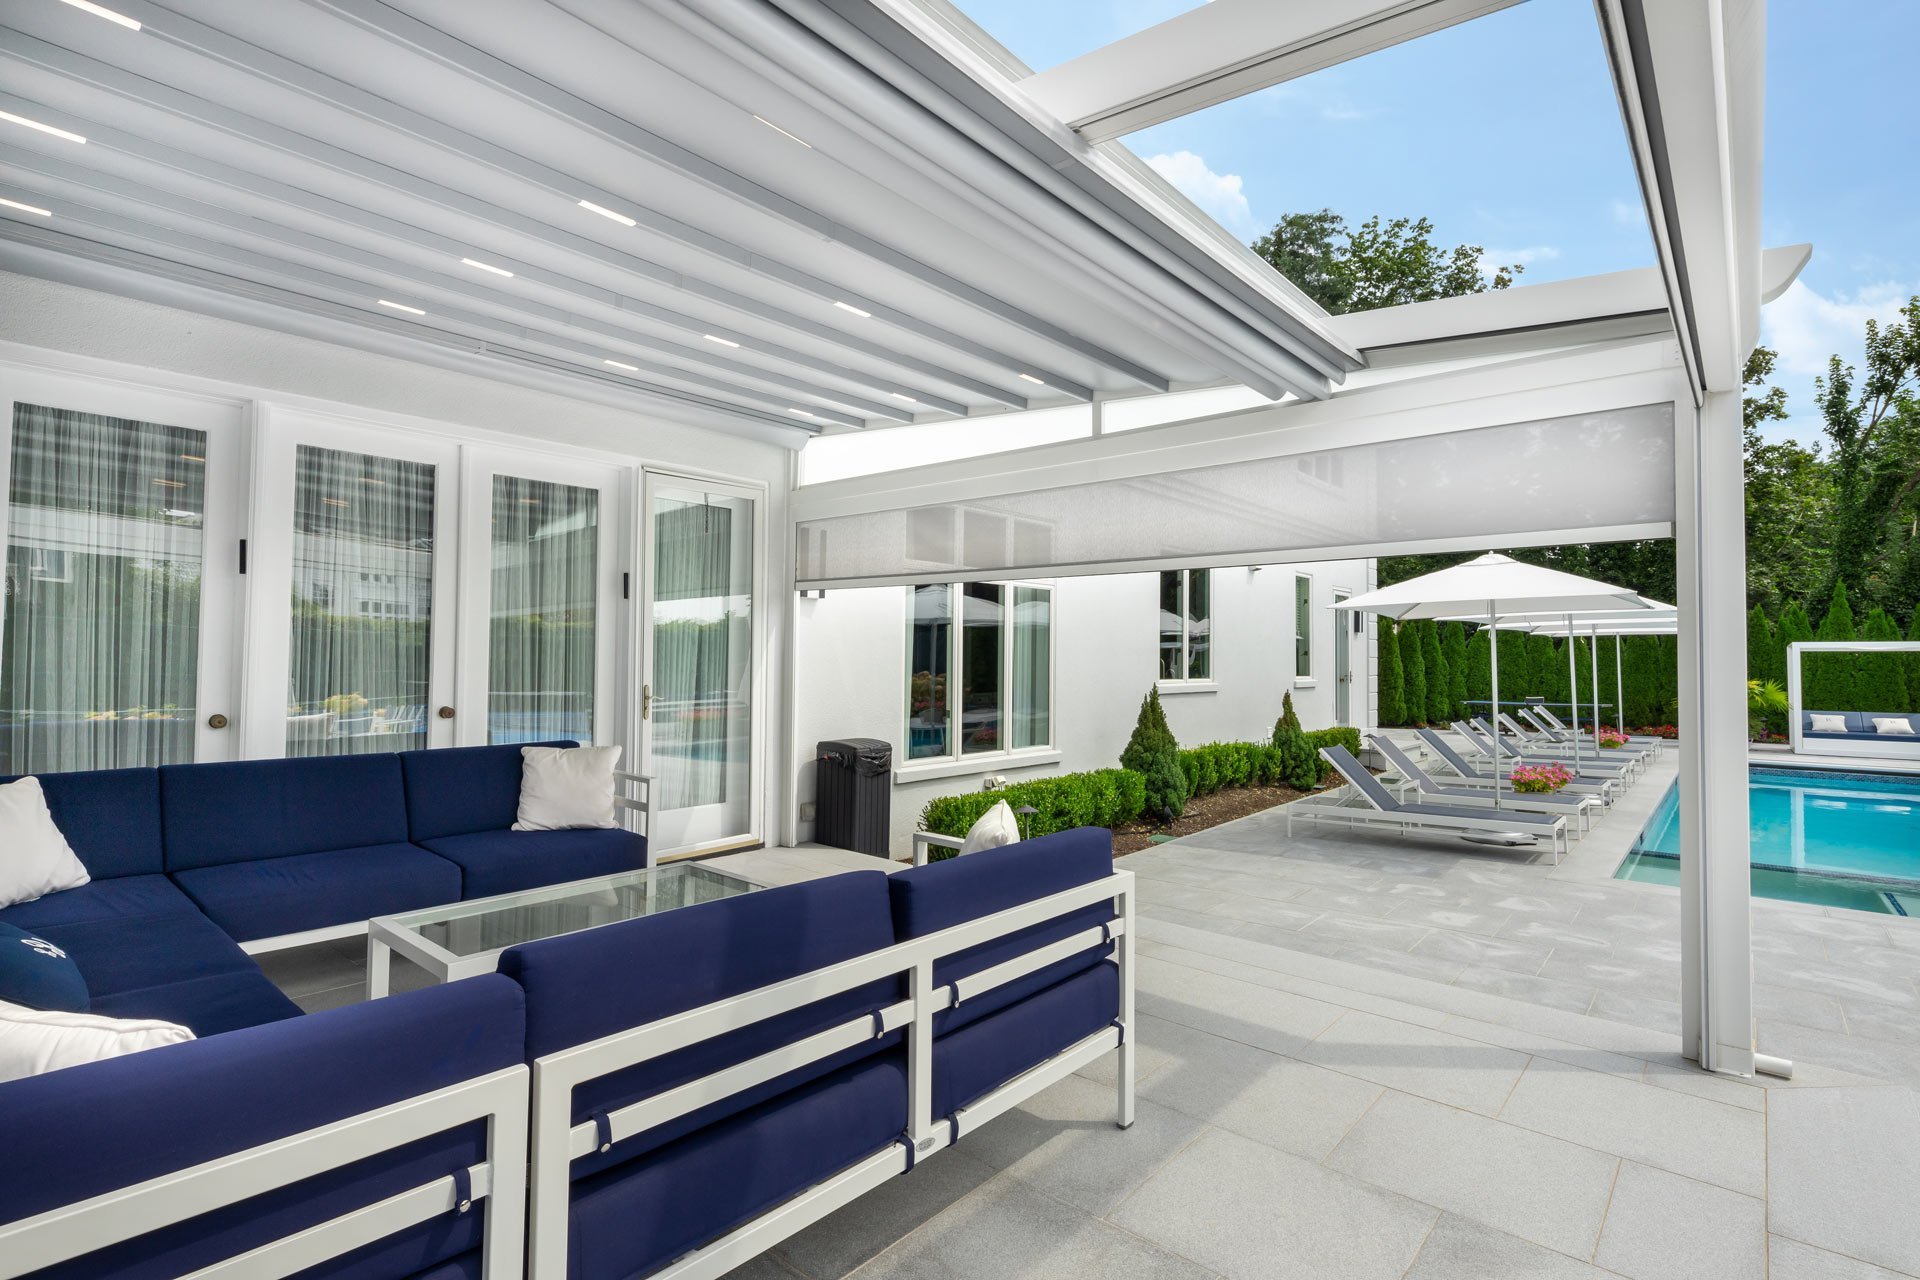 Deal white retractable awning sukkah pool